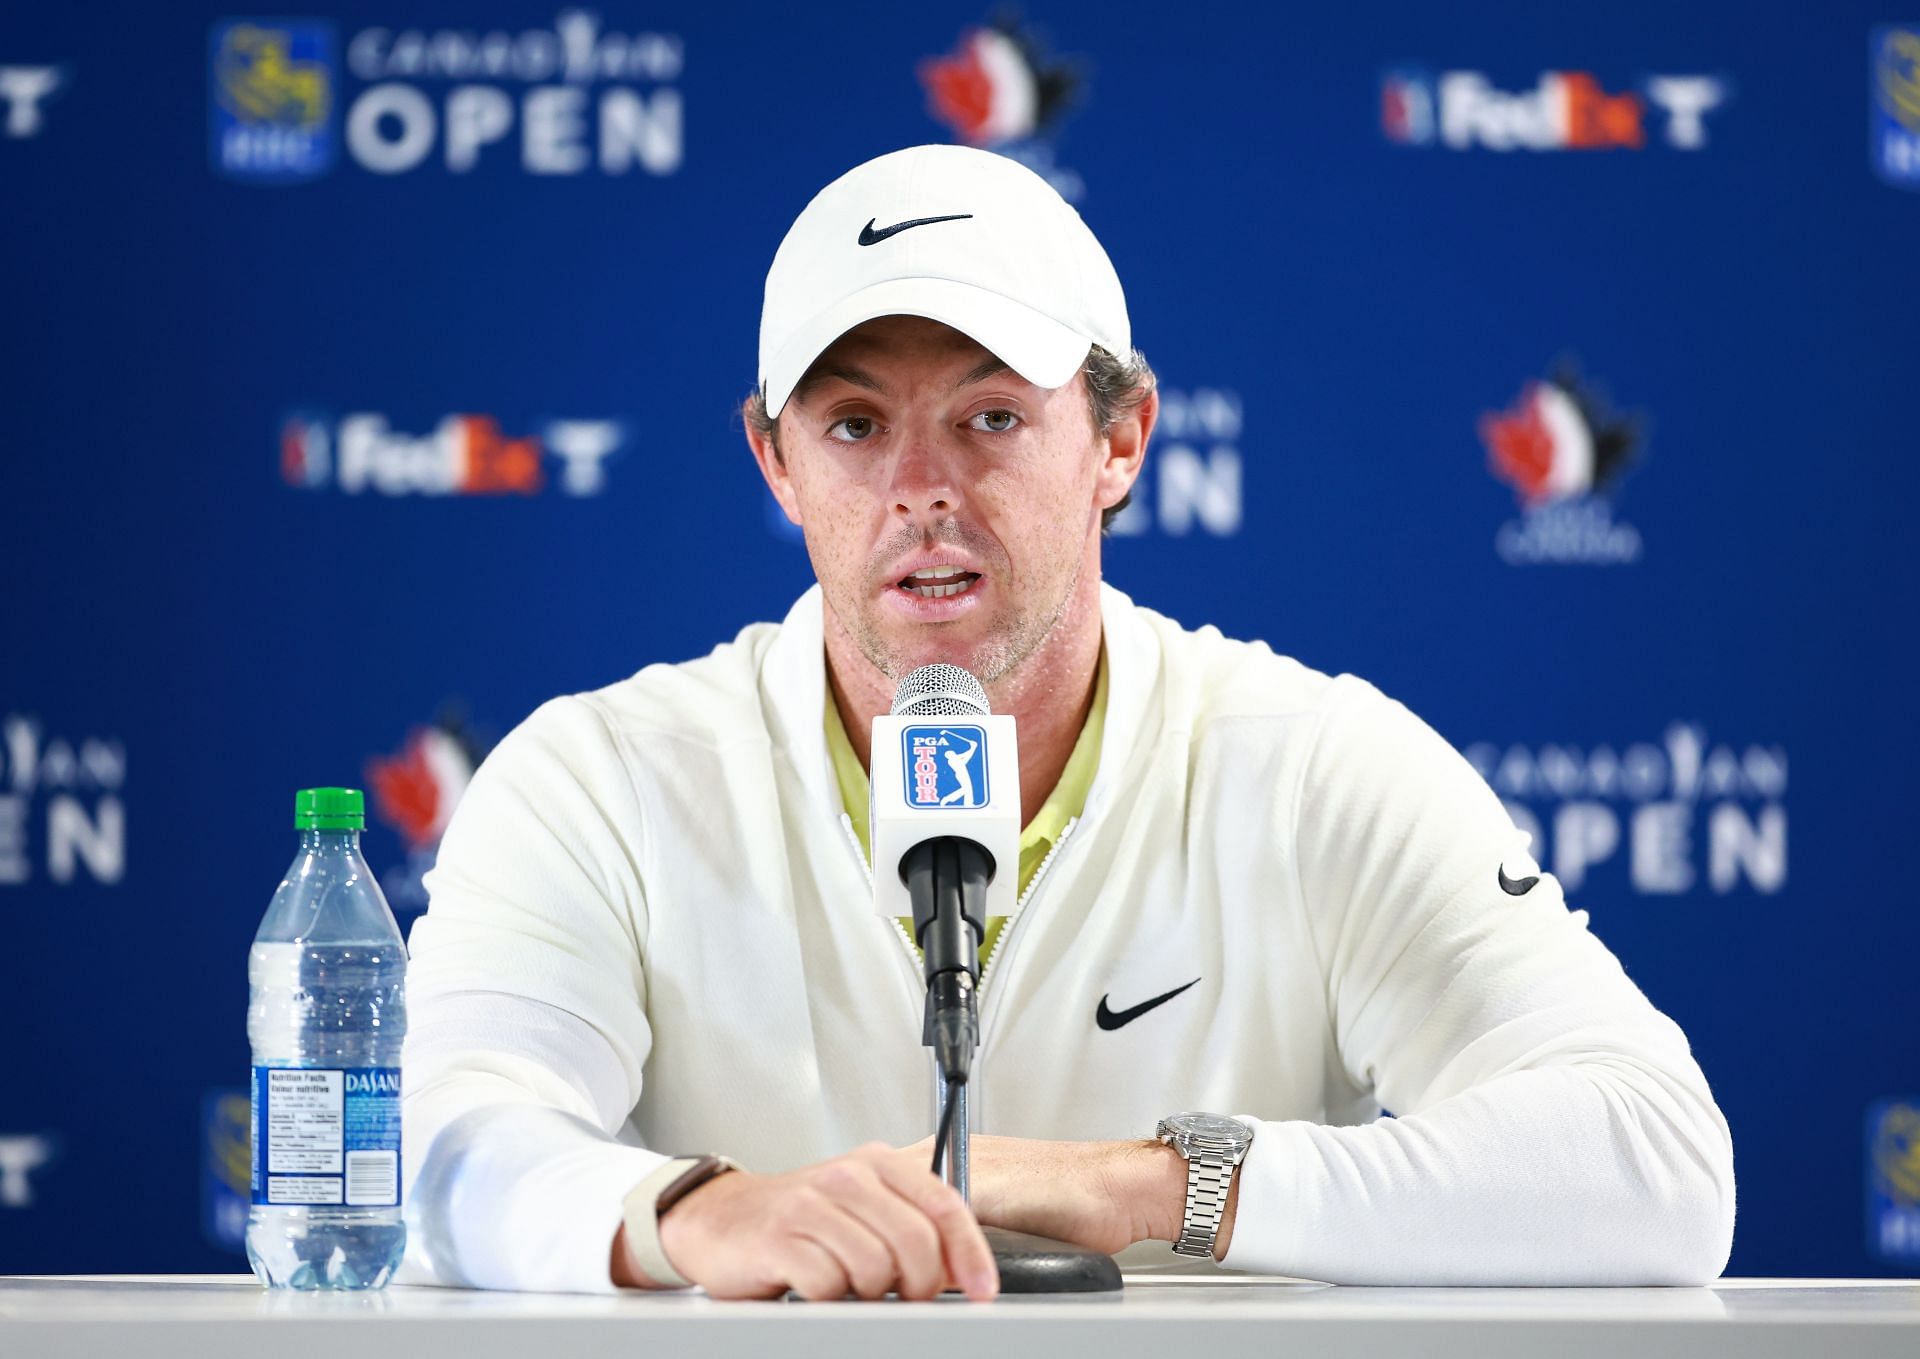 Rory McIlroy at the 2023 RBC Canadian Open (via Getty Images)